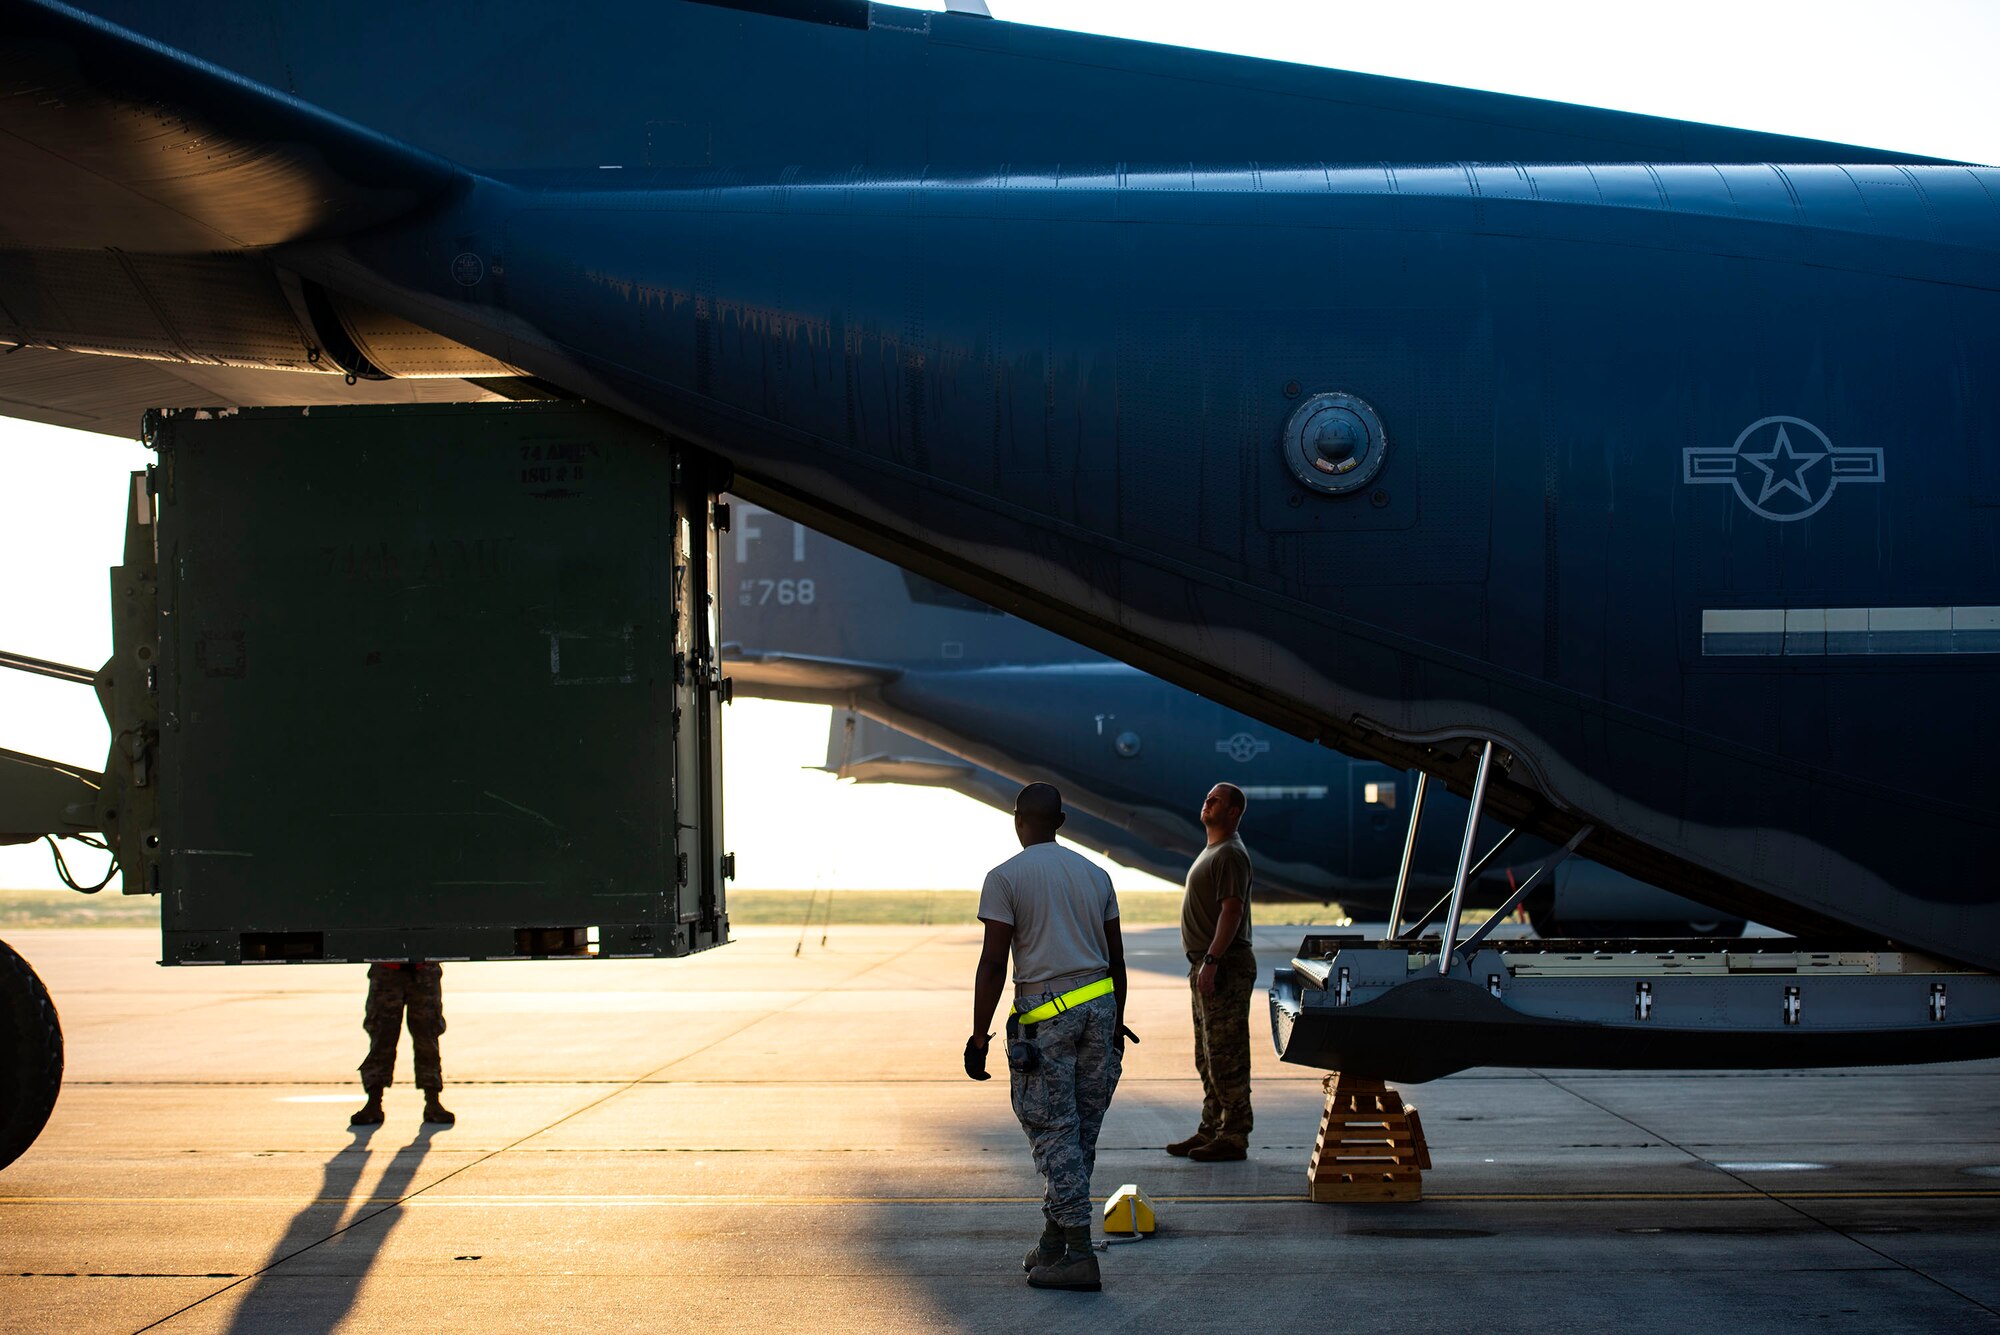 Airmen from the 71st Rescue Squadron load equipment onto an HC-130J Combat King II Aug. 30, 2019, at Moody Air Force Base (AFB), Ga. The aircraft was used to transport personnel and equipment to Little Rock AFB, Ark. in support of Hurricane Dorian aircraft relocation efforts. (U.S. Air Force photo by Senior Airman Erick Requadt)